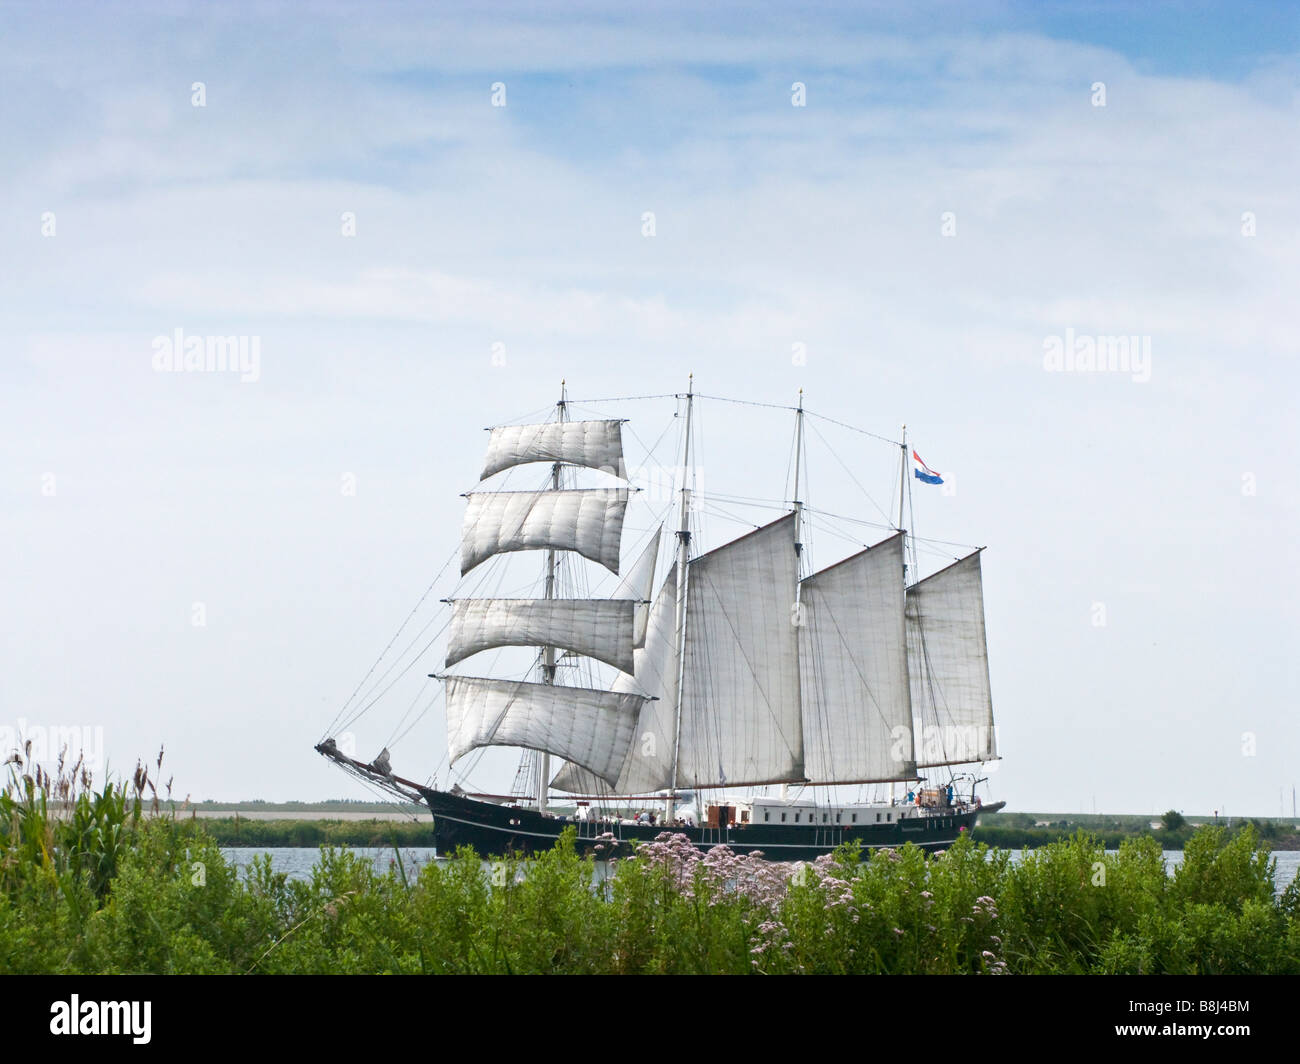 Sailship with four masts and sails up, Isselmeer, Enkhuizen the Netherlands 2008 For editorial use only. Stock Photo